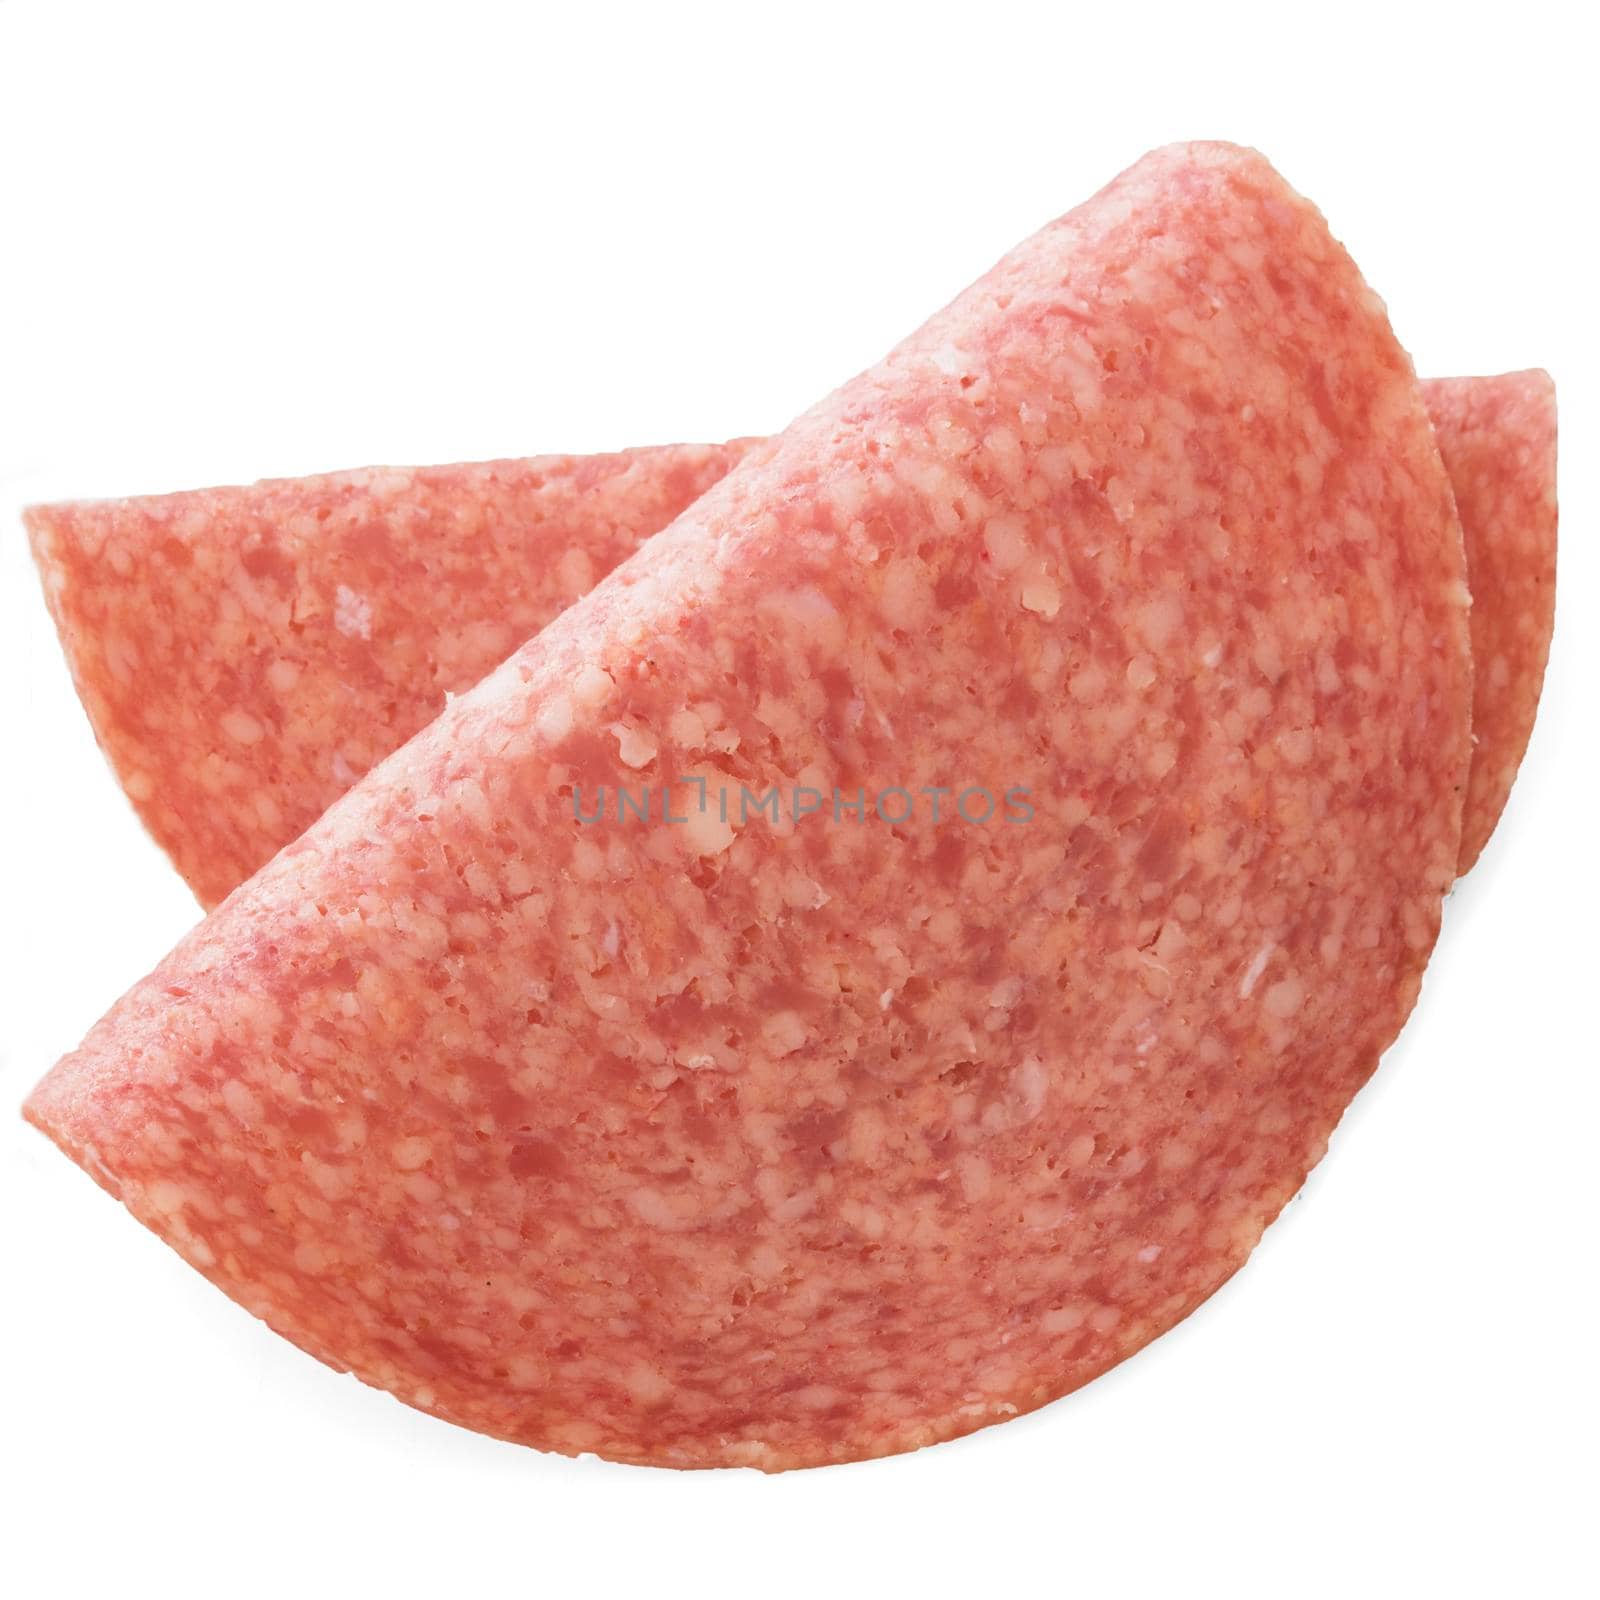 Slices of salami isolated on a white background